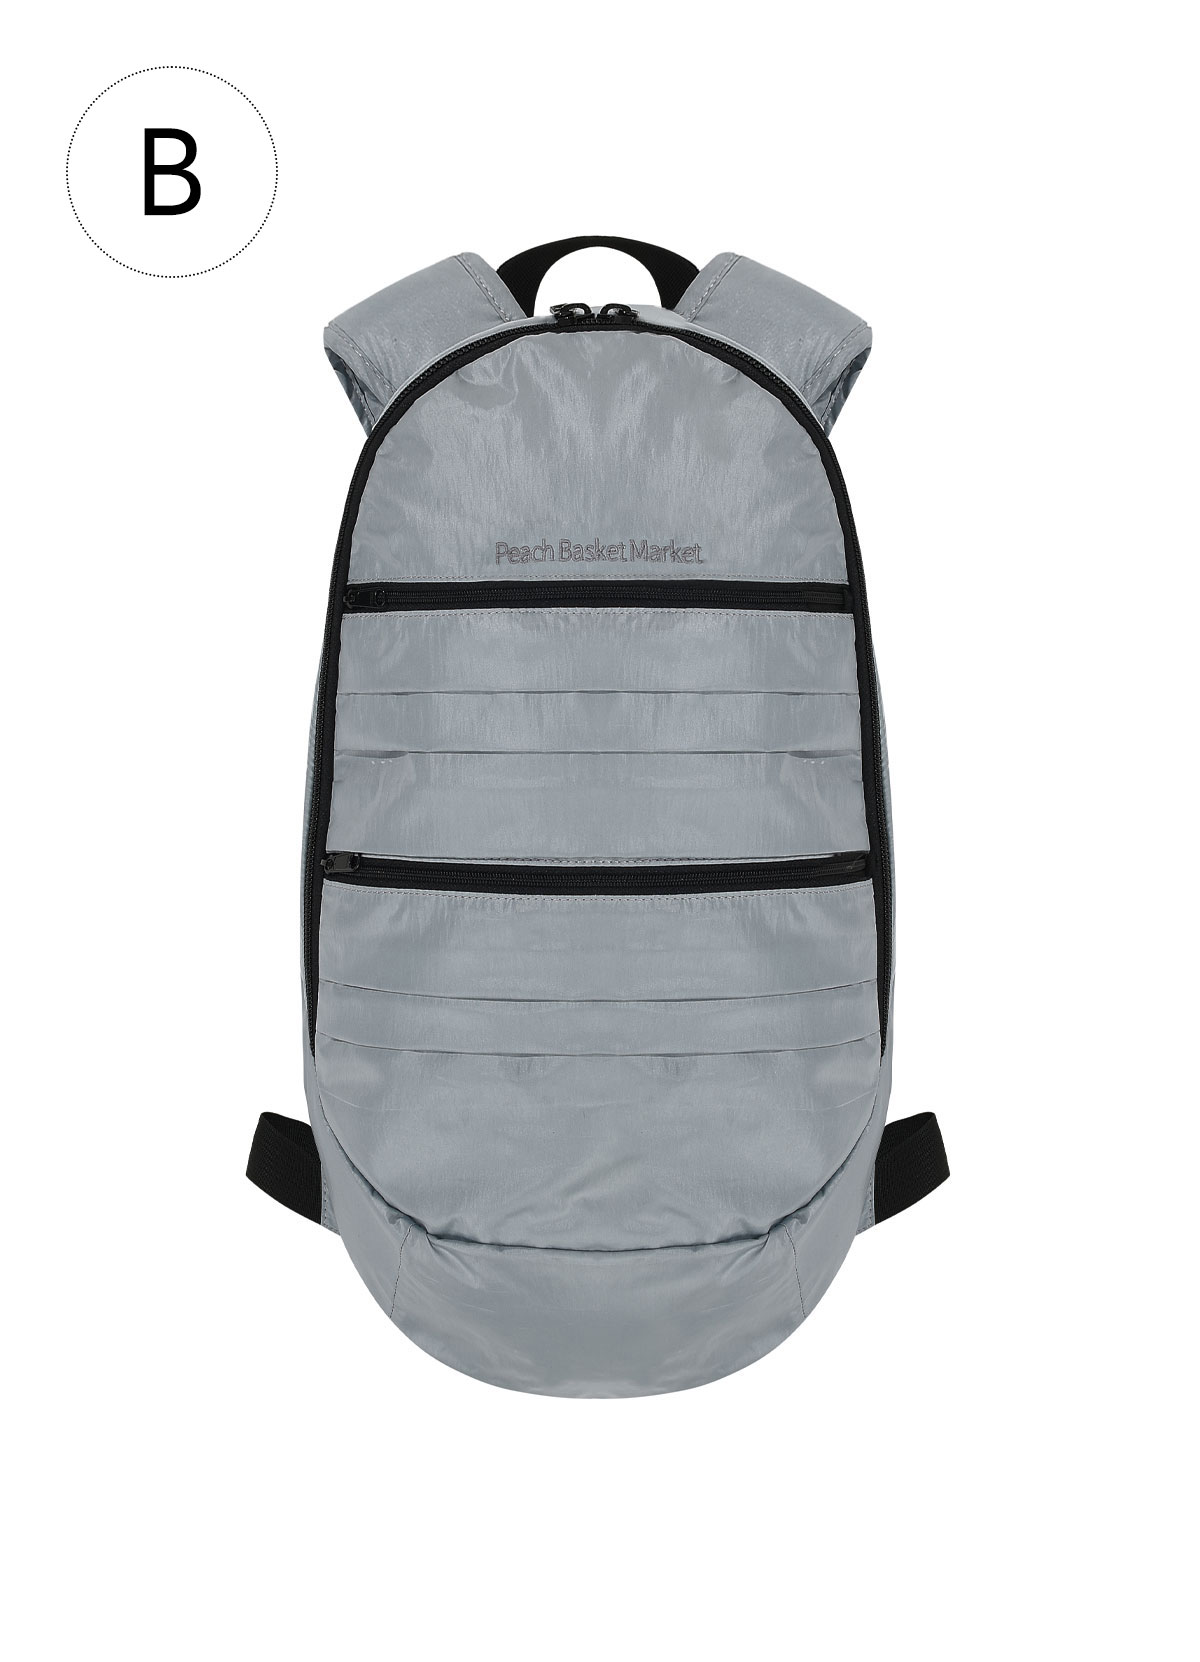 Ⓑ Layer Backpack (bluegray)